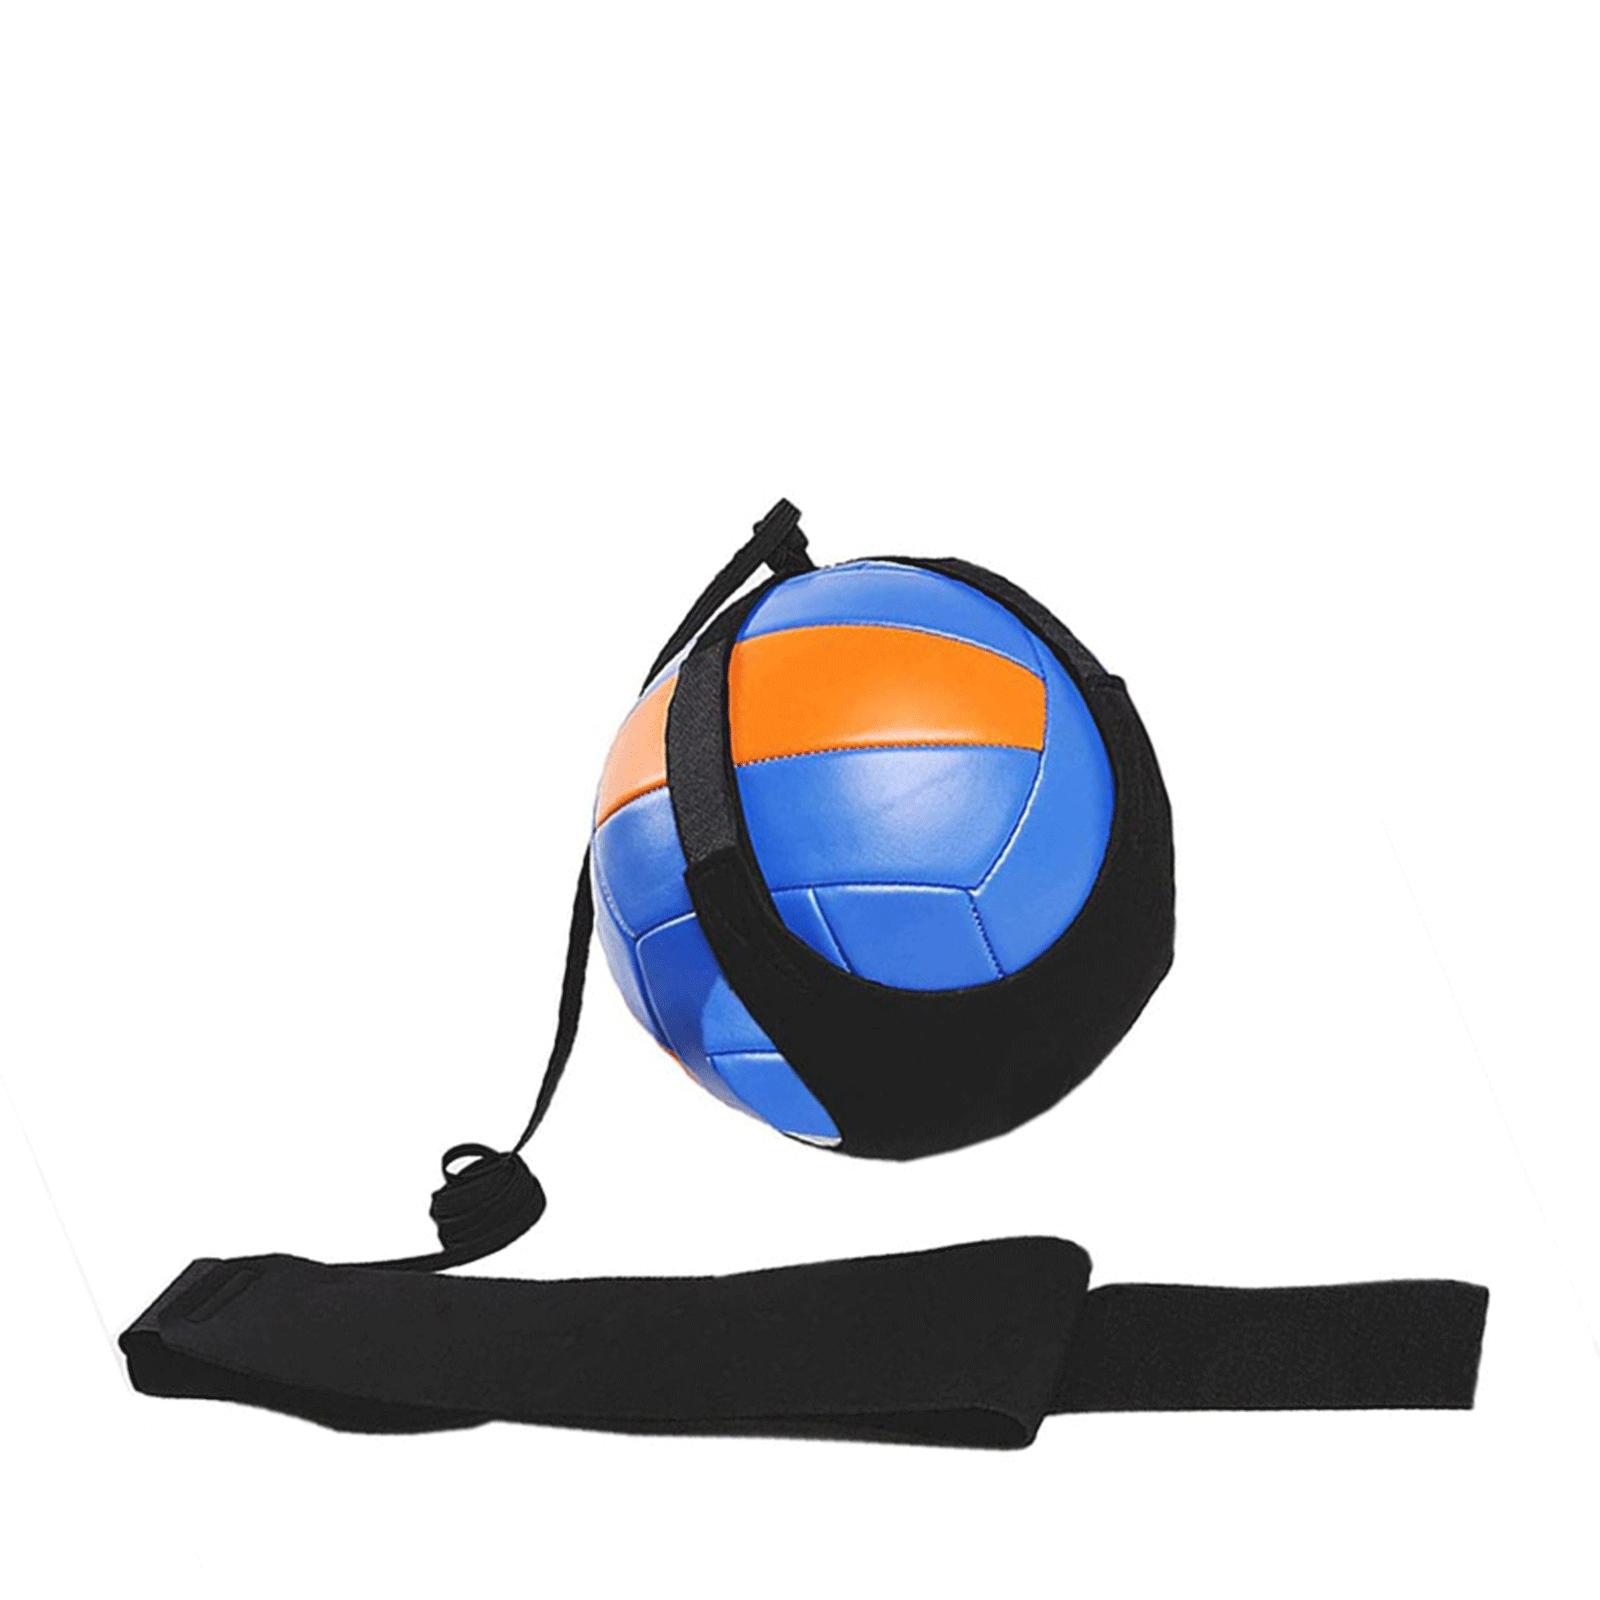 Volleyball Training Equipment with Adjustable Waist Belt for Beginners